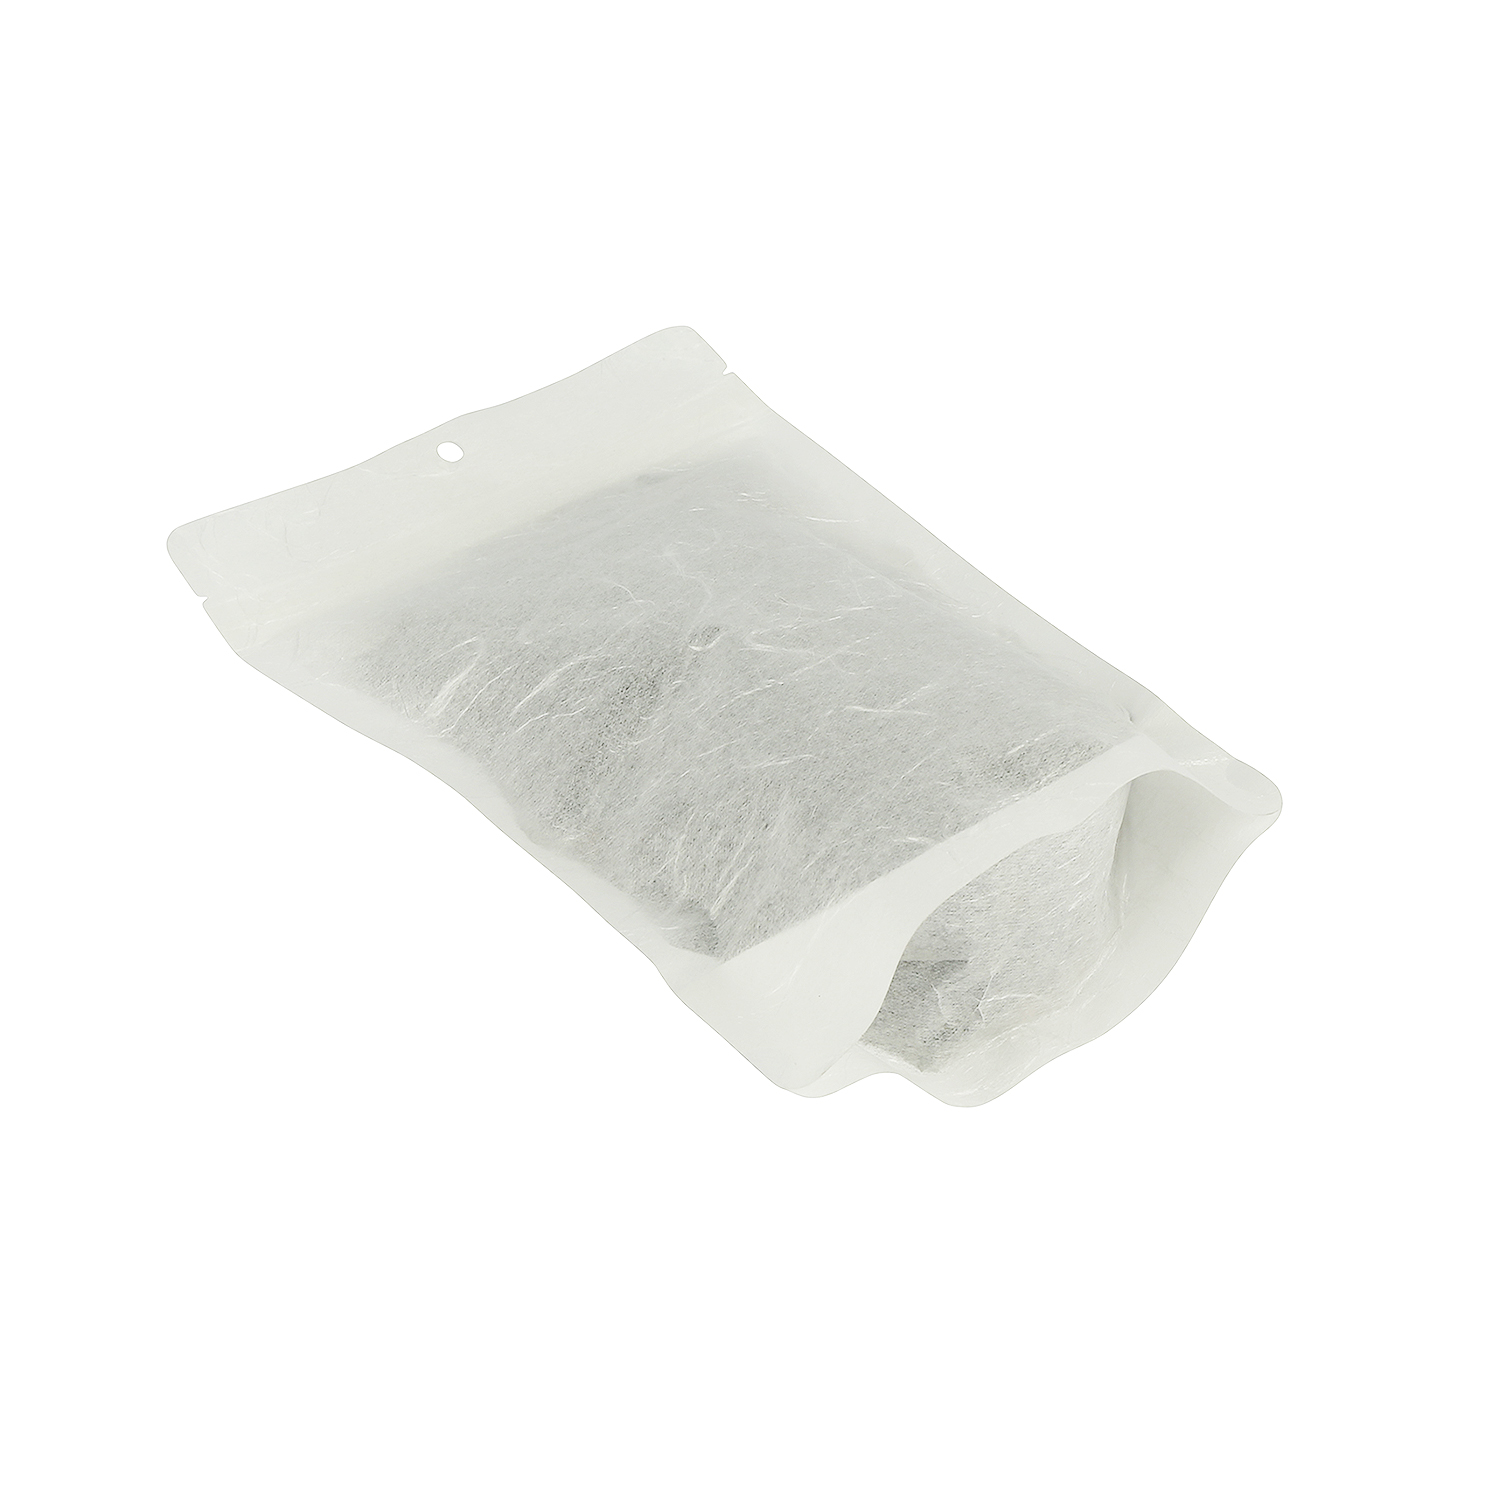 NK PBS Home Compostable Bag Clear Rice Paper respaldado Pouch